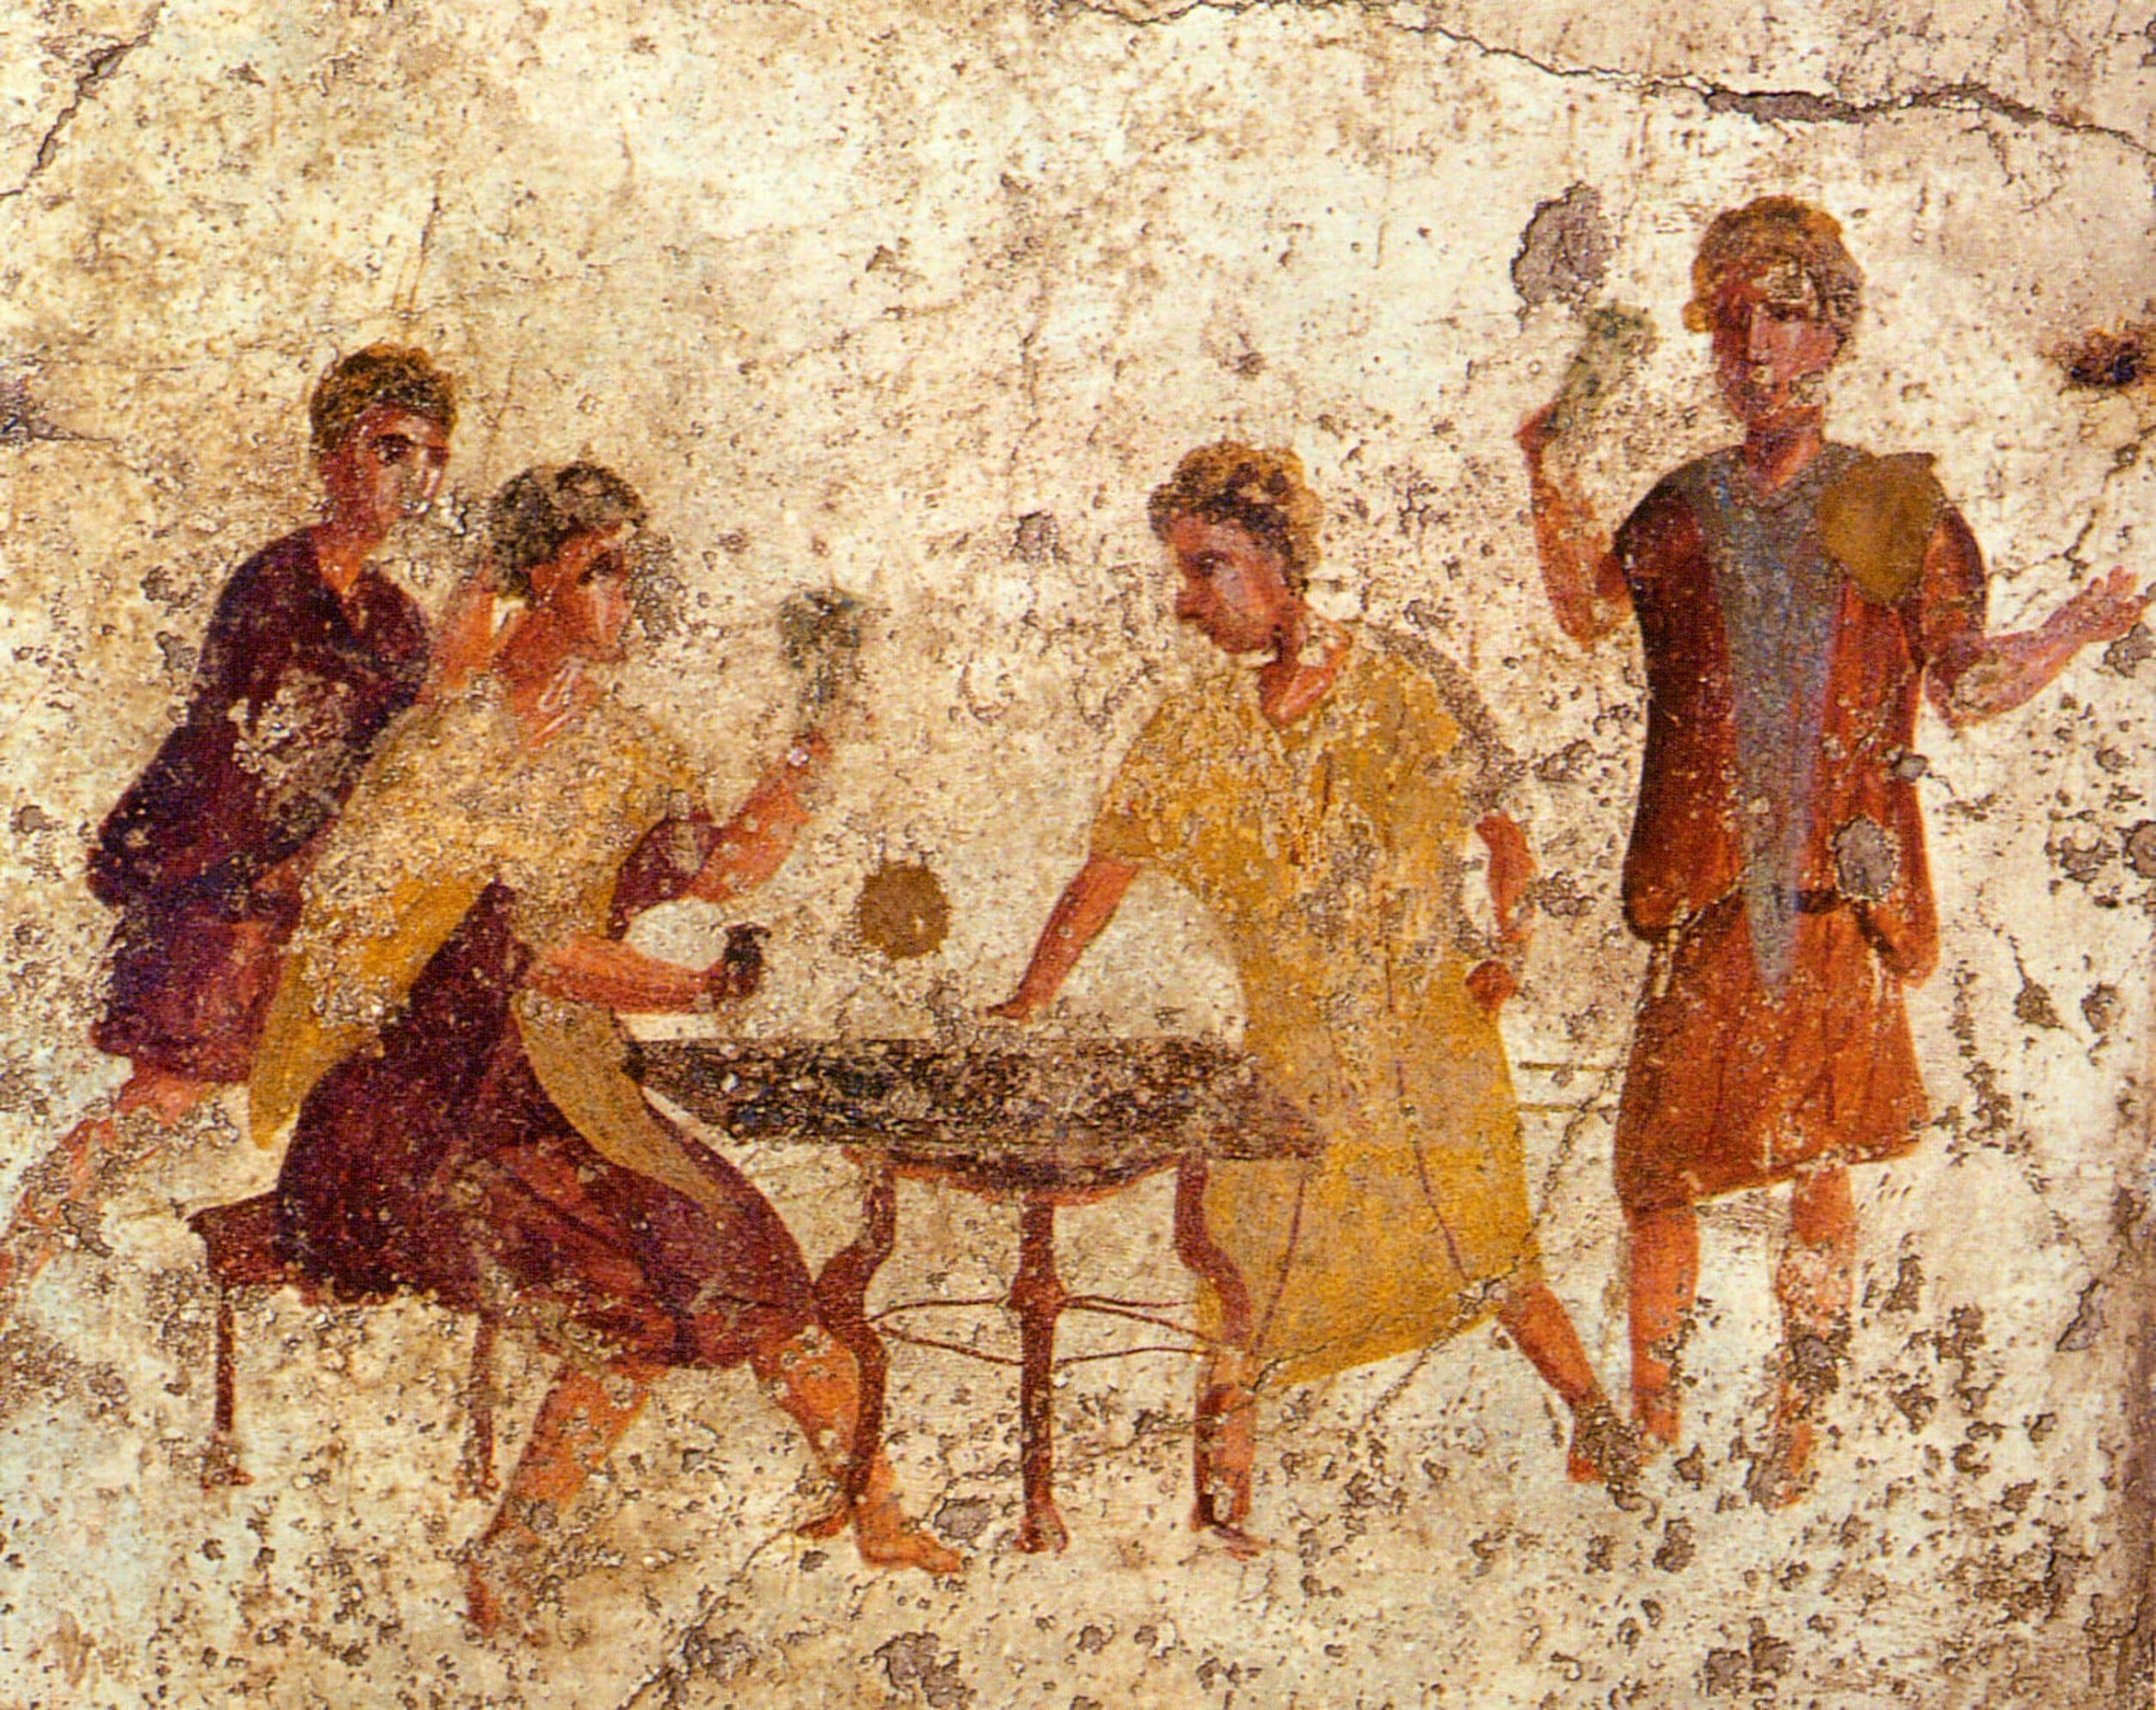 A wall painting showing two men gambling with dice at a table. Two more men stand on either side watching.